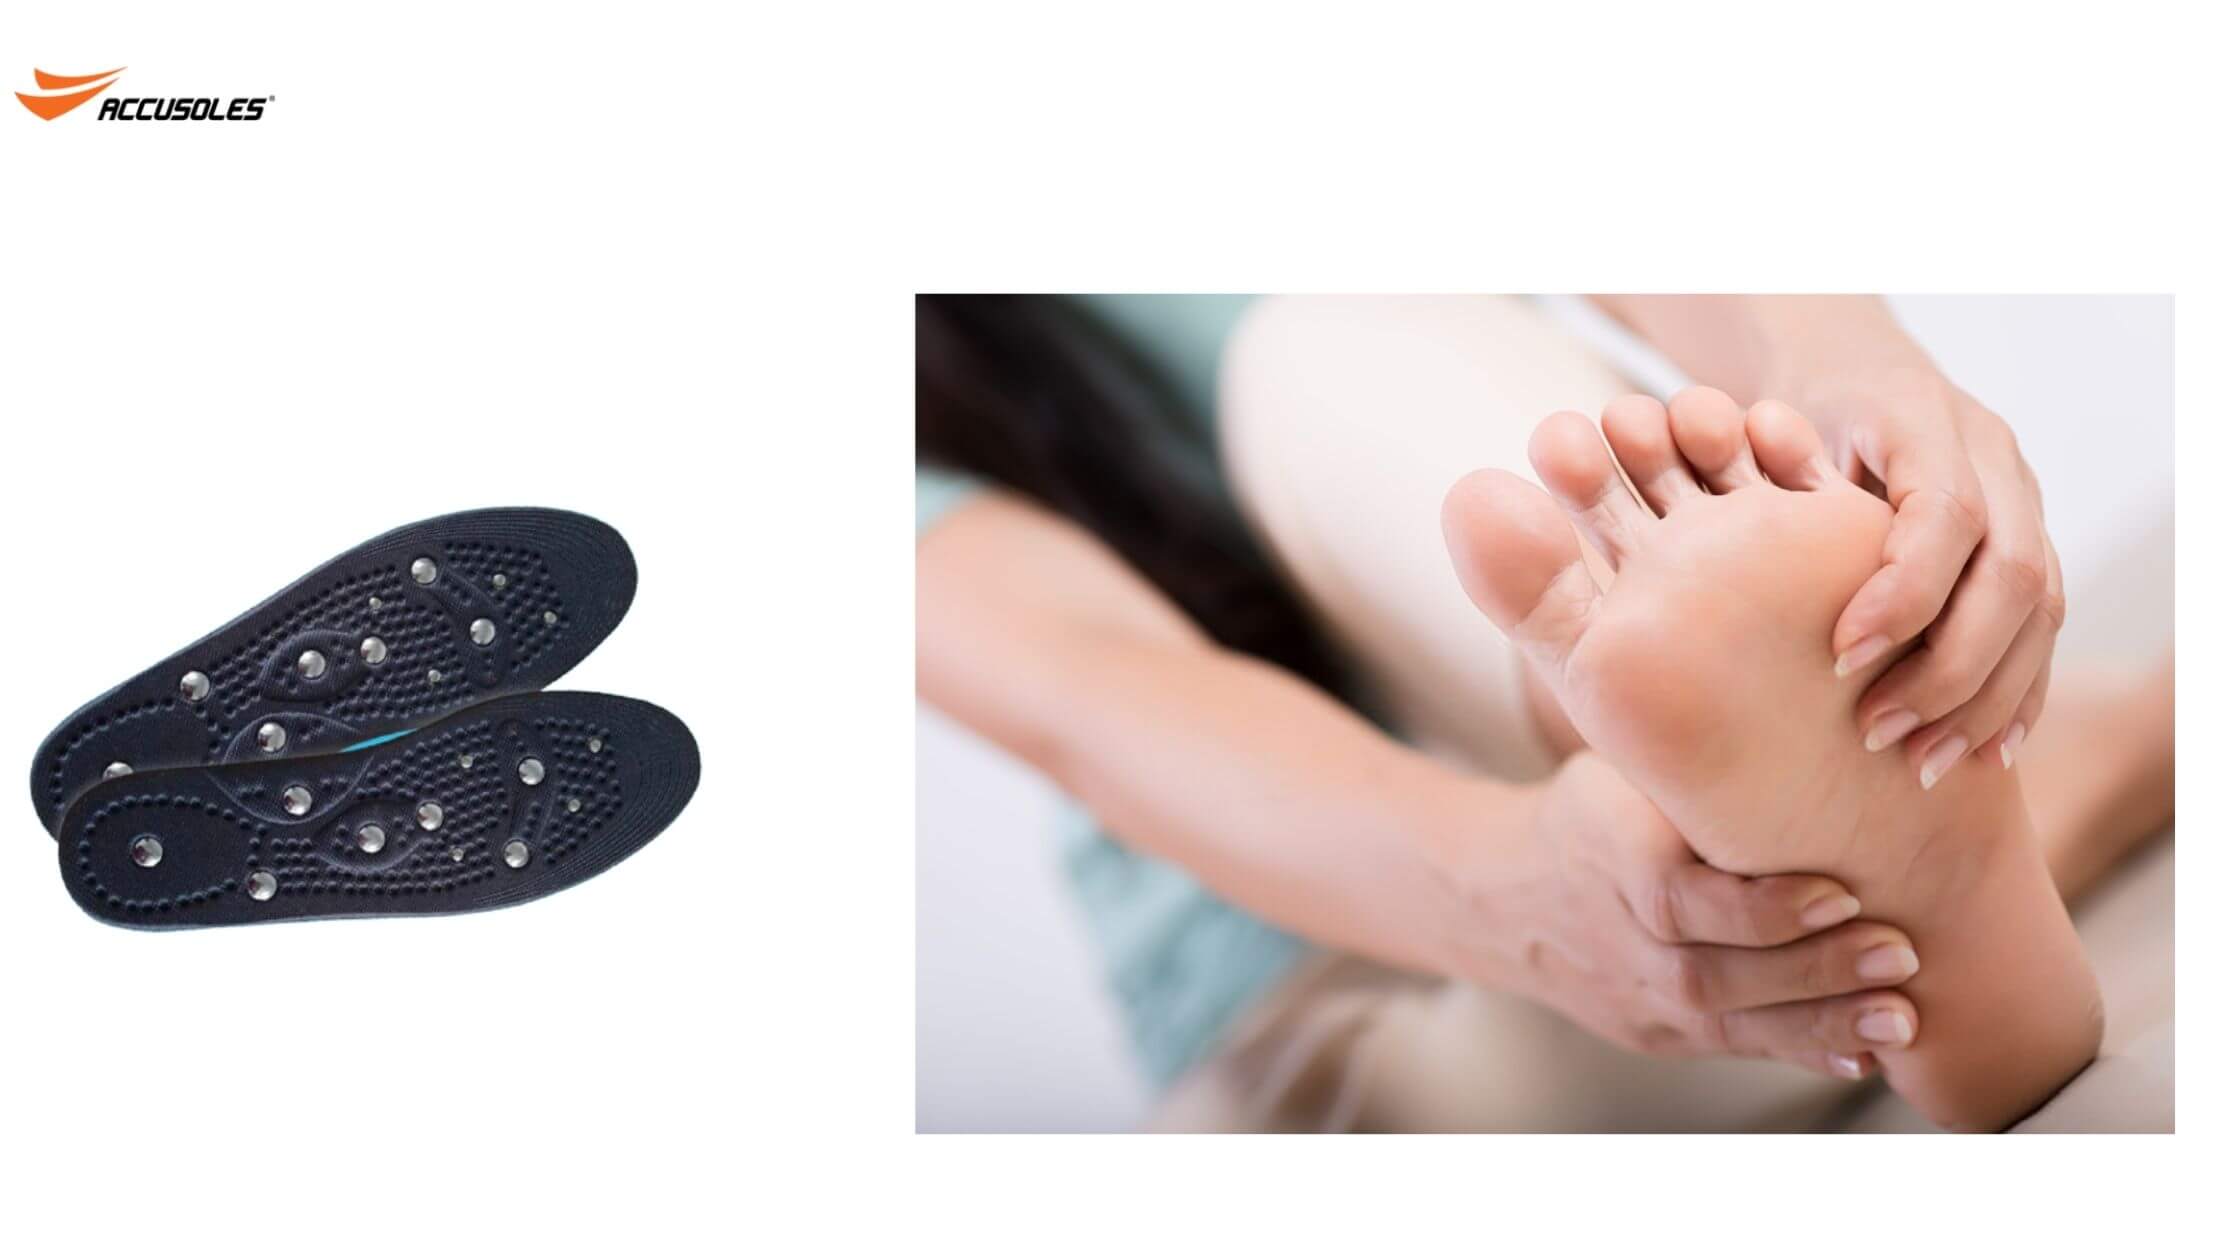 Accusoles For footpain